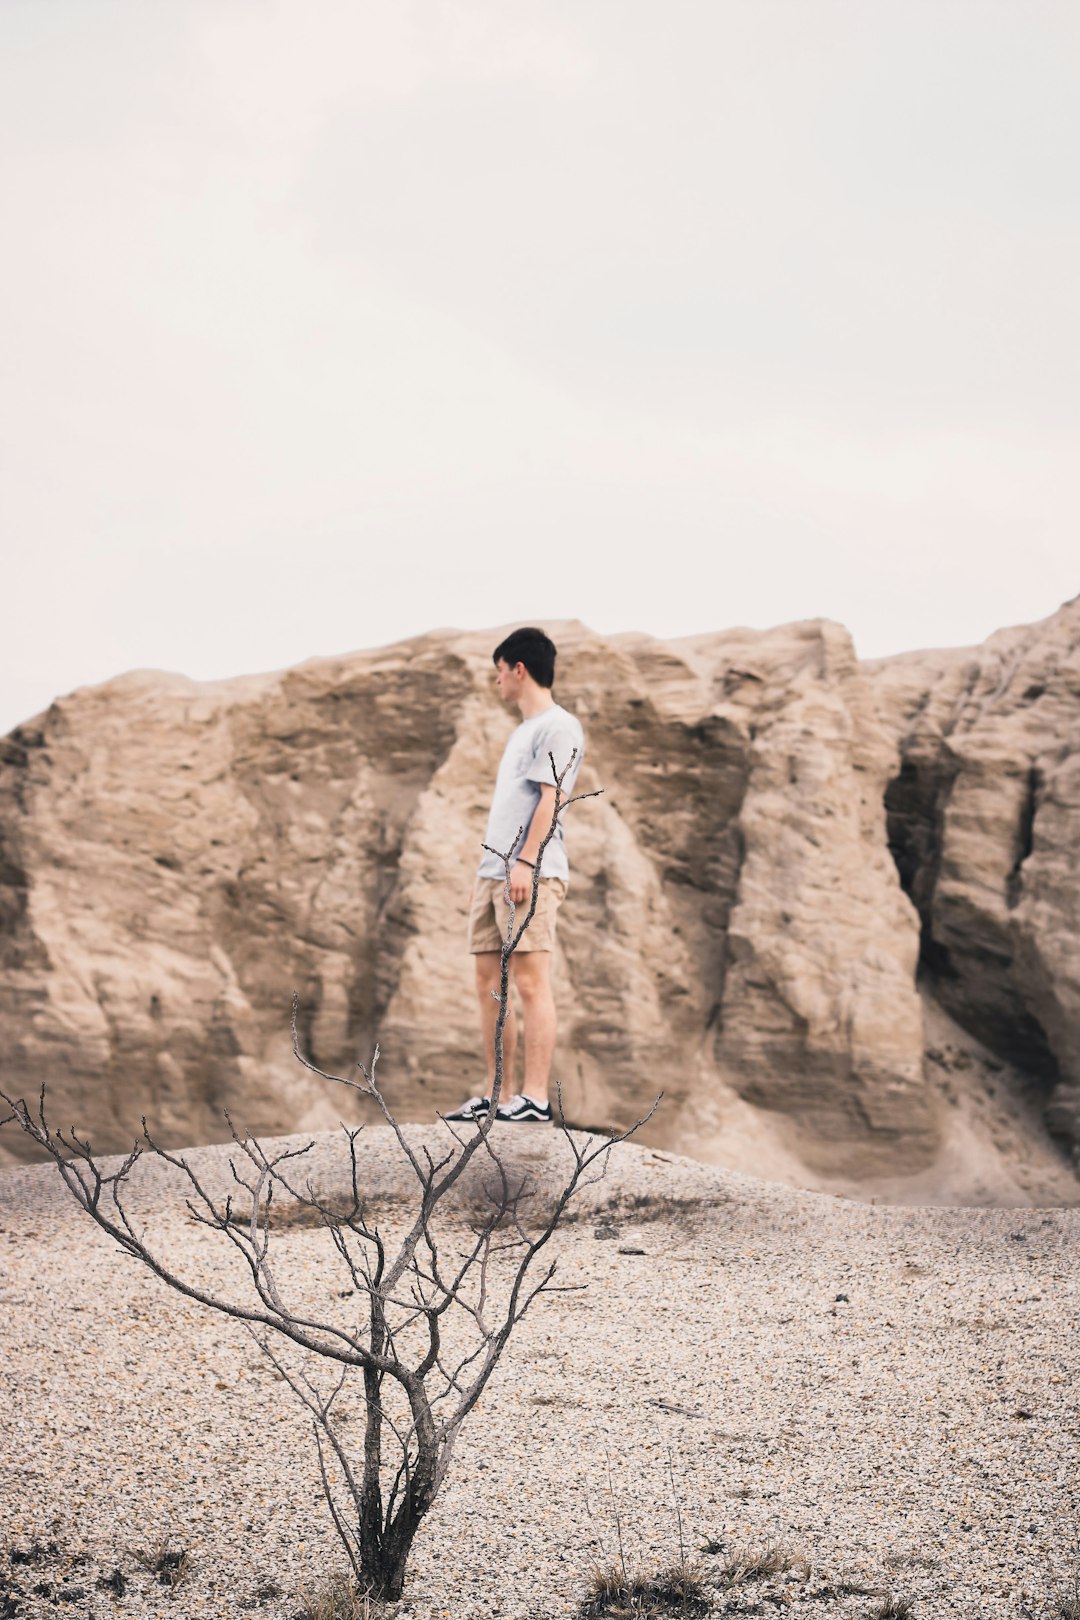 man in white t-shirt standing on brown rock formation during daytime